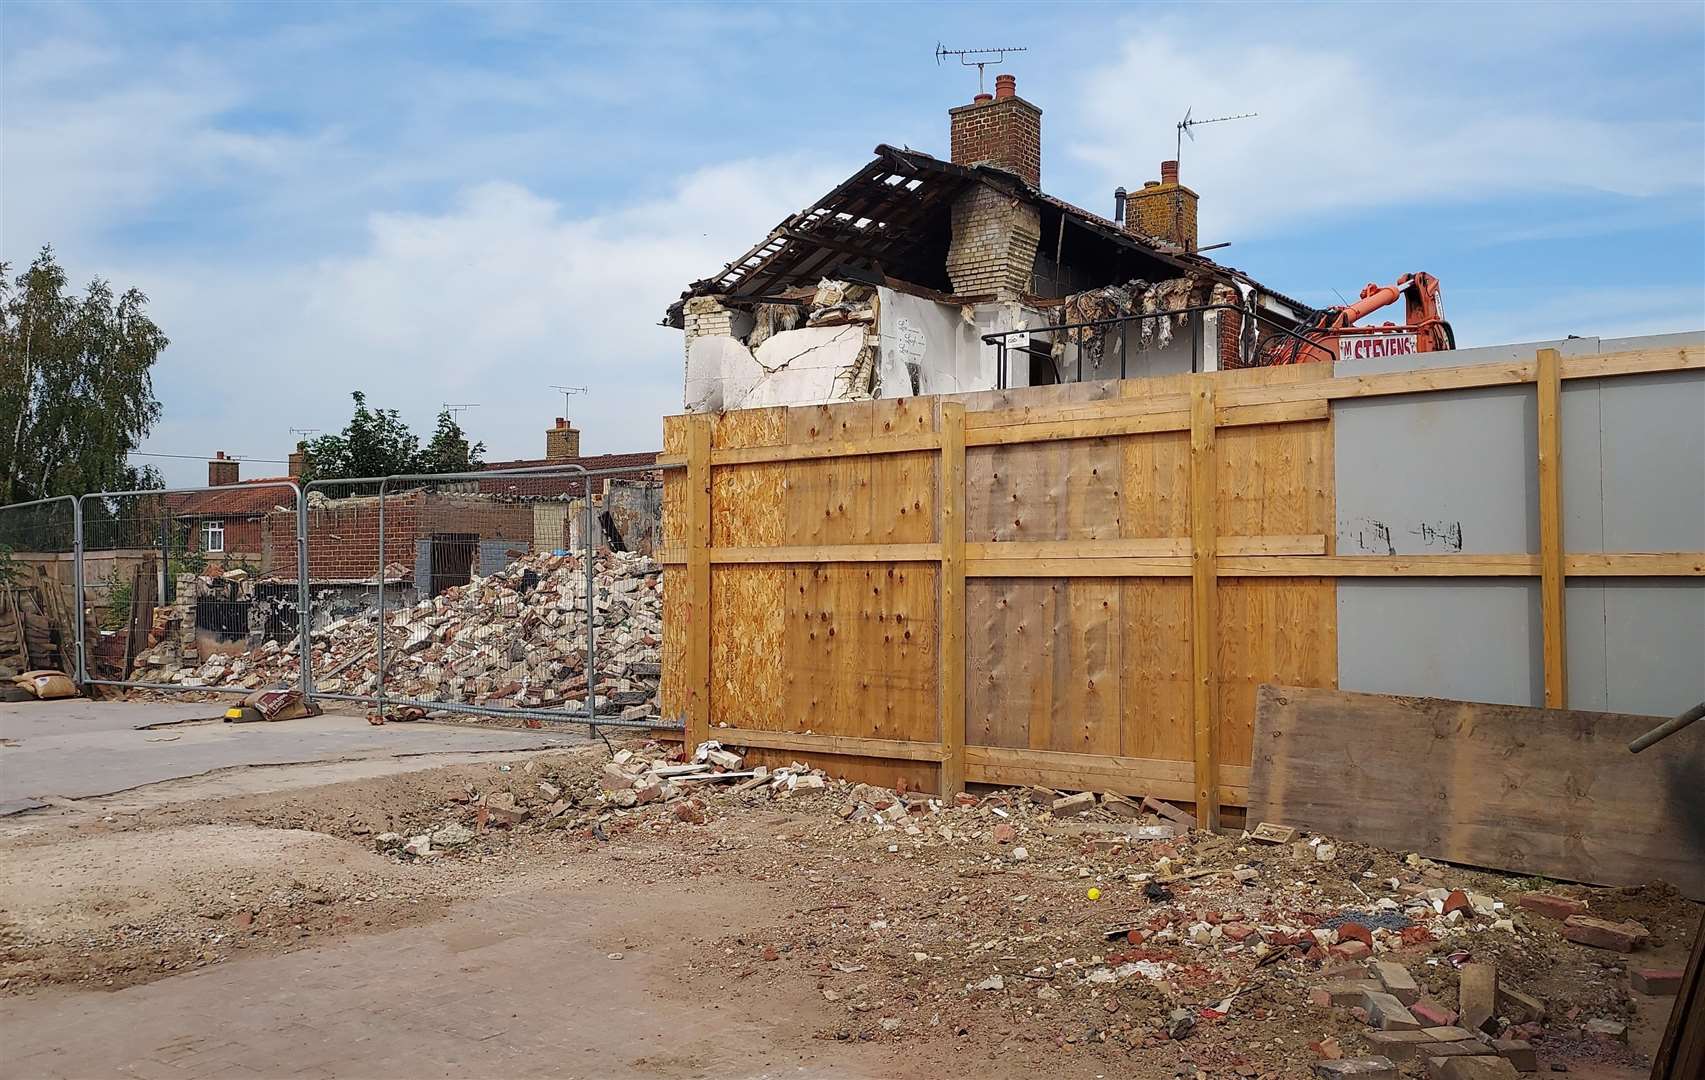 The final properties are demolished months after the explosion